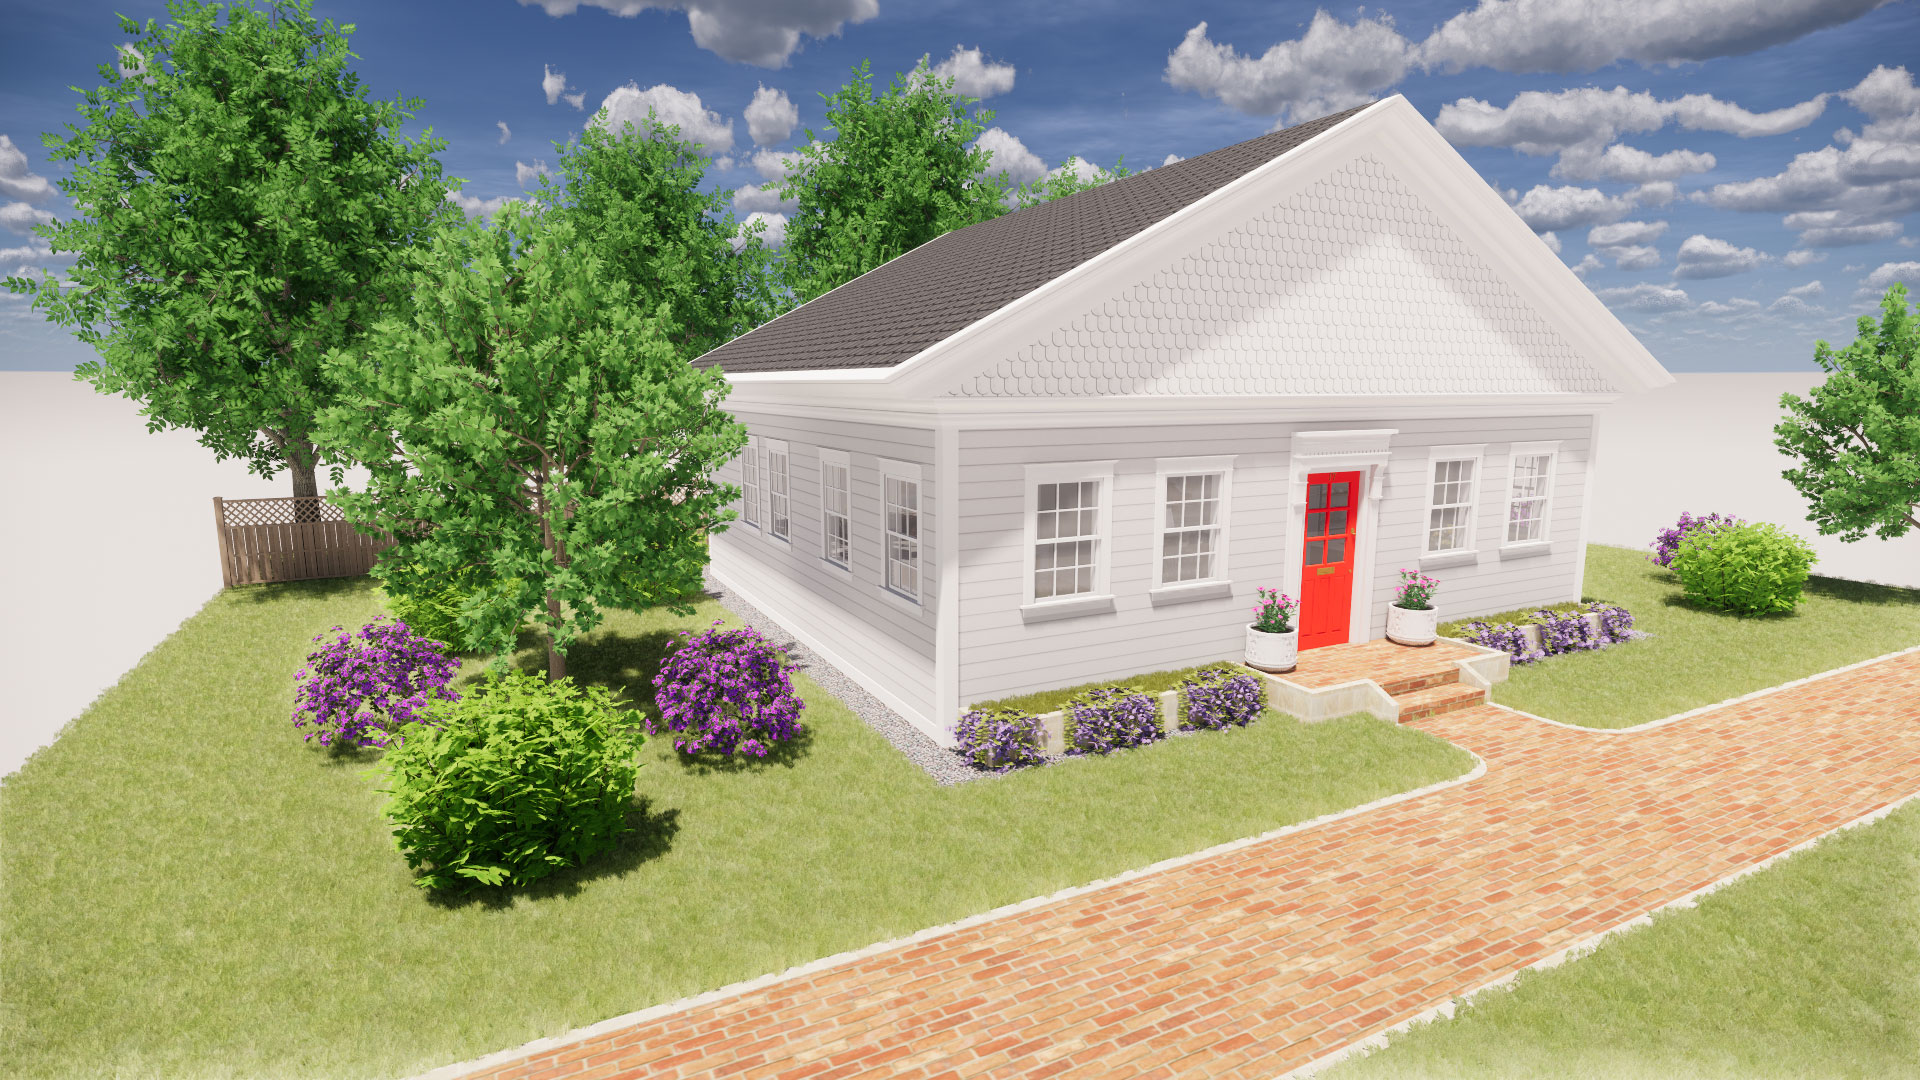 Exterior render of white colonial style houses with a red door and many windows. Flowers and bushes around.